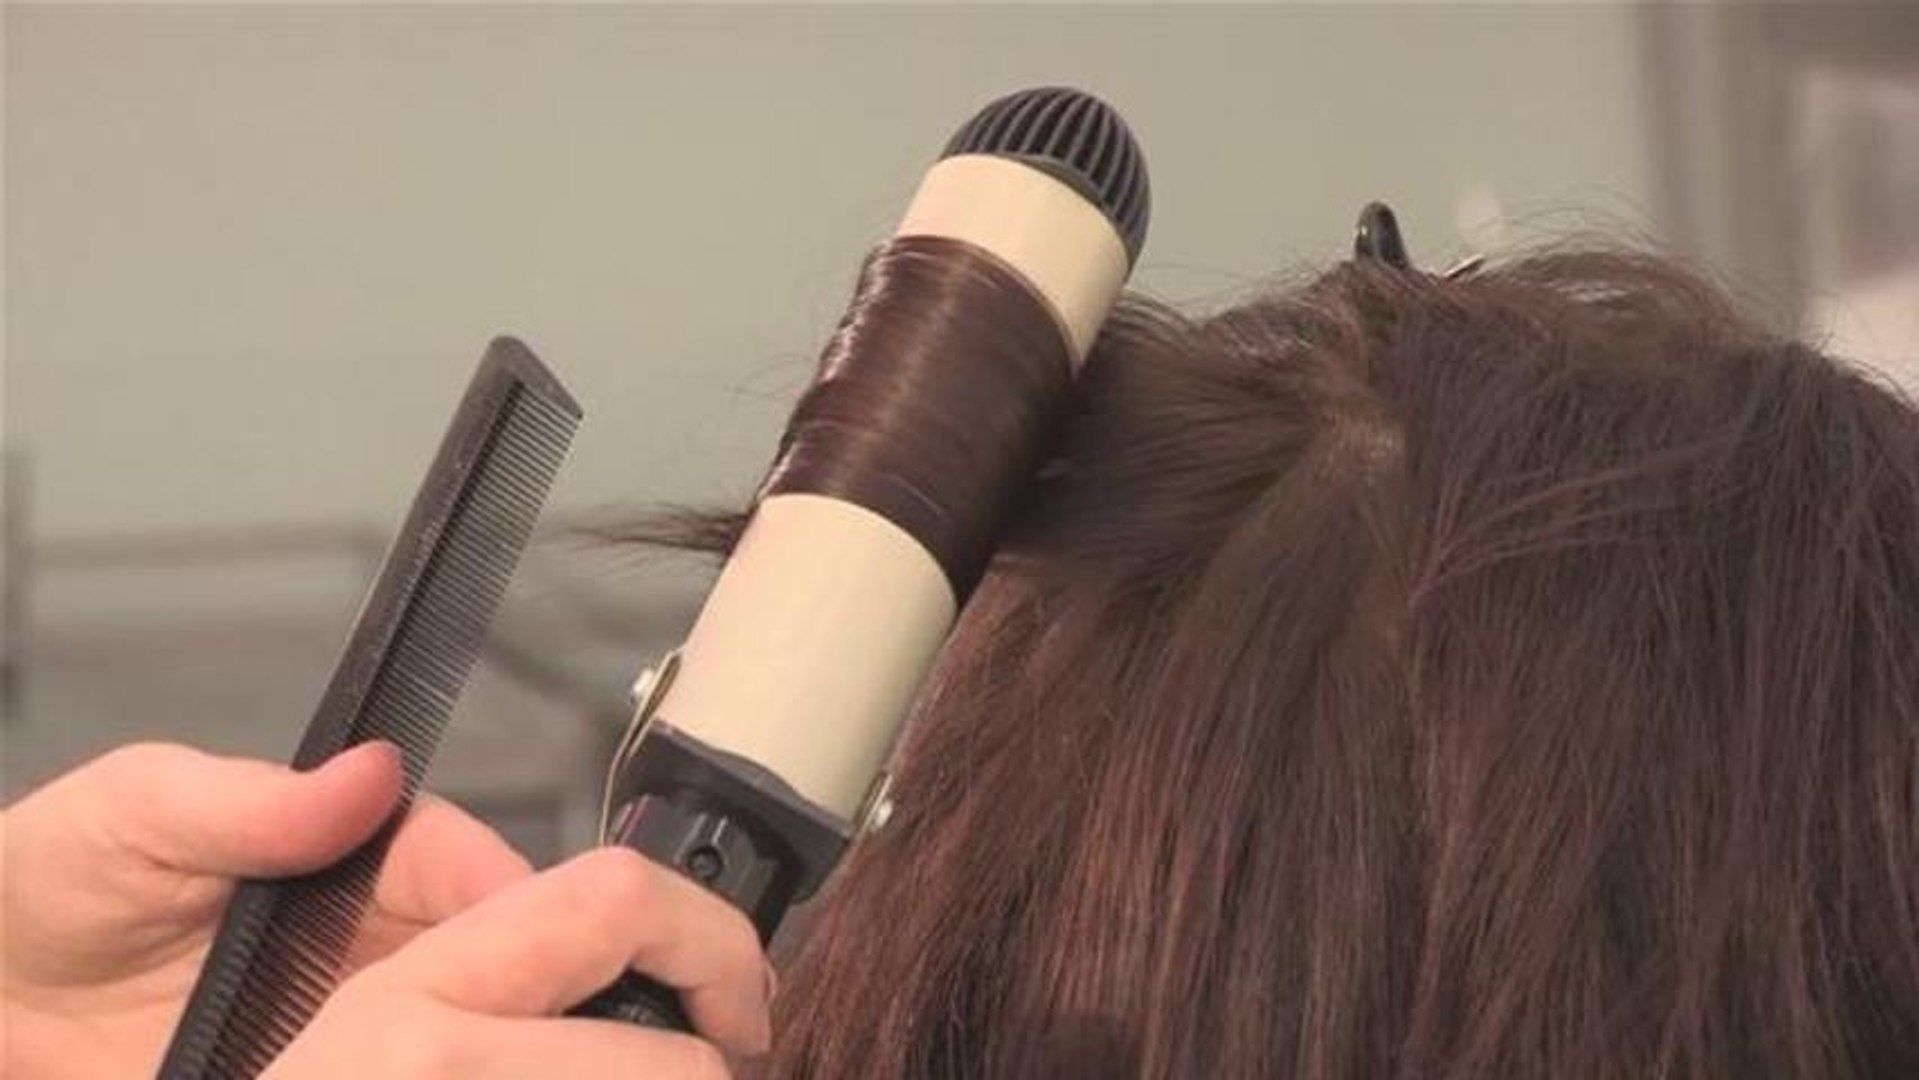 How To Style Hair Using Electric Curlers - video Dailymotion